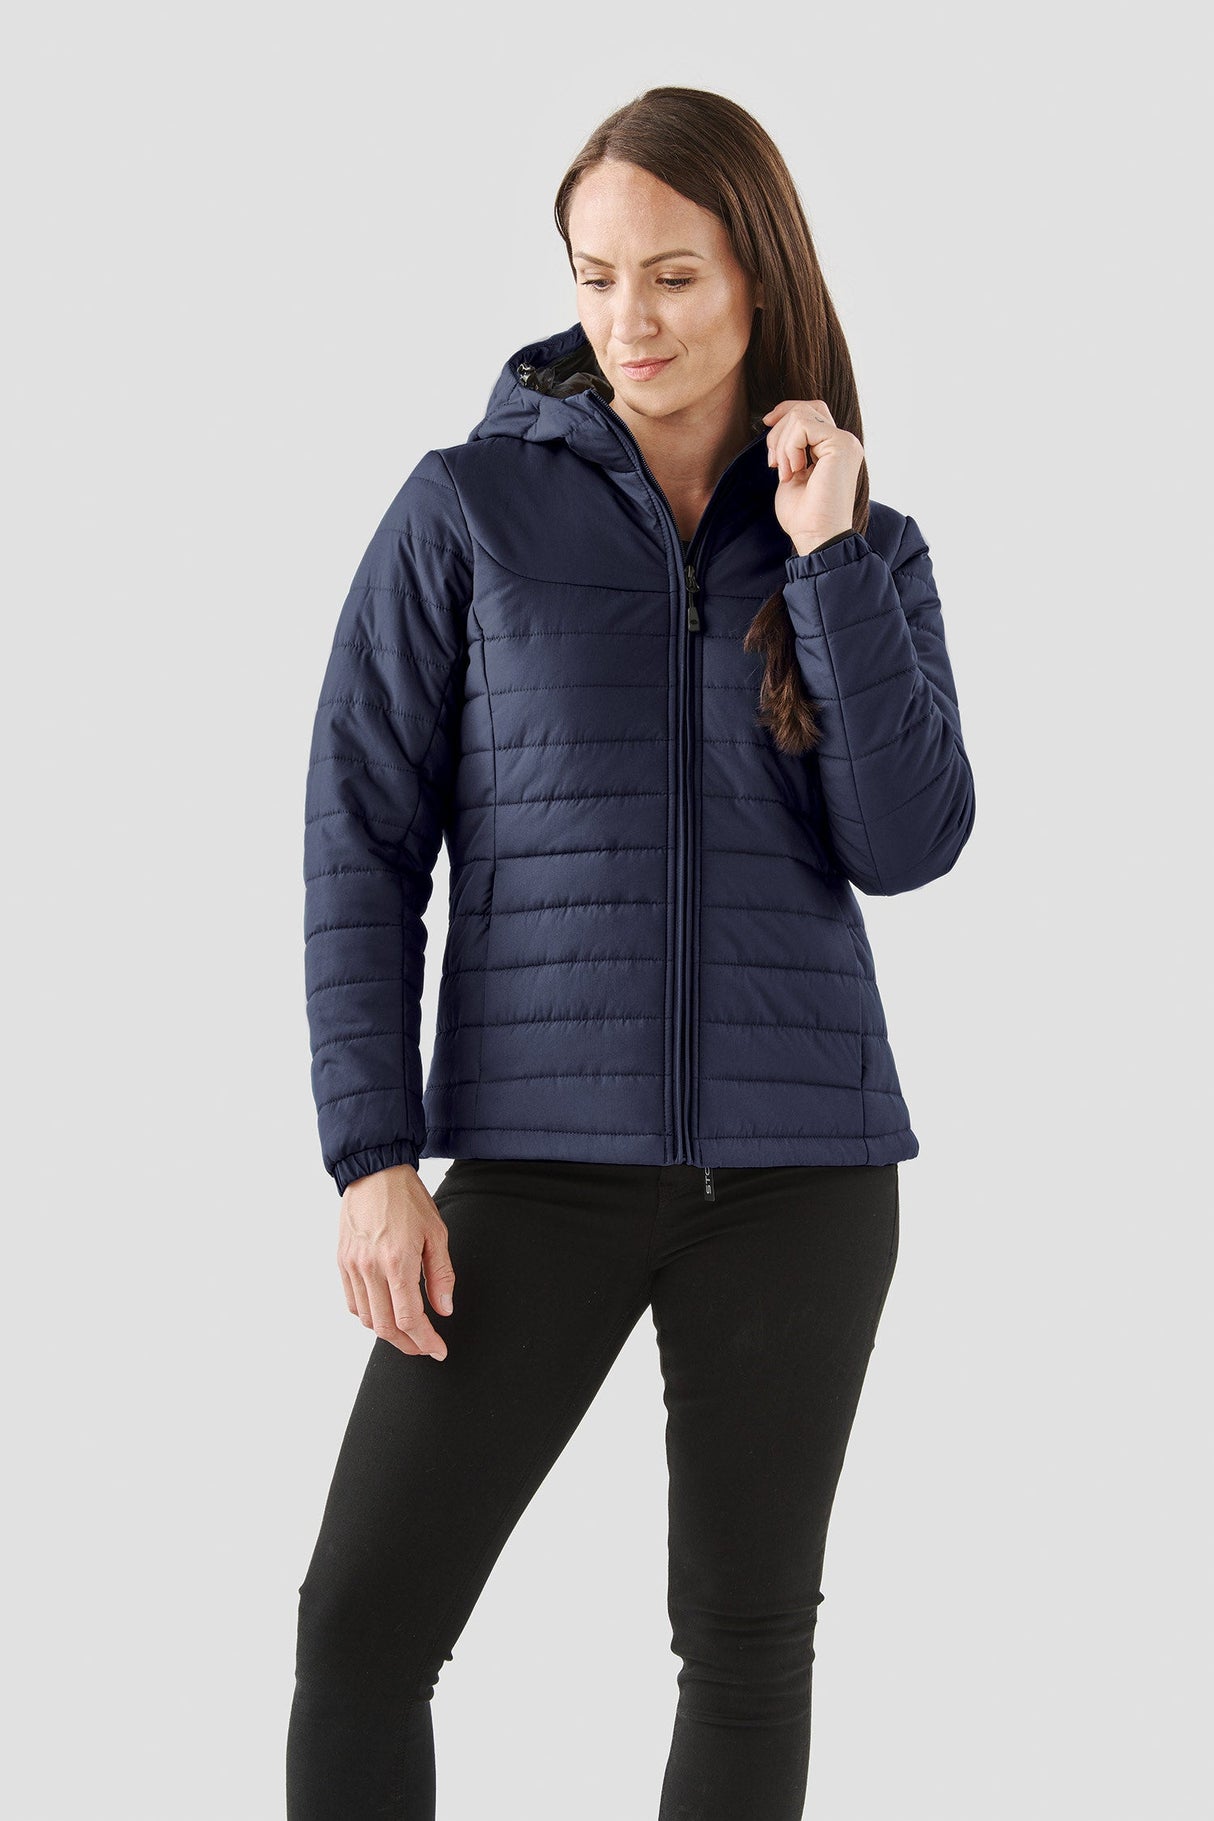 Stormtech Women's Nautilus Quilted Hooded Jacket